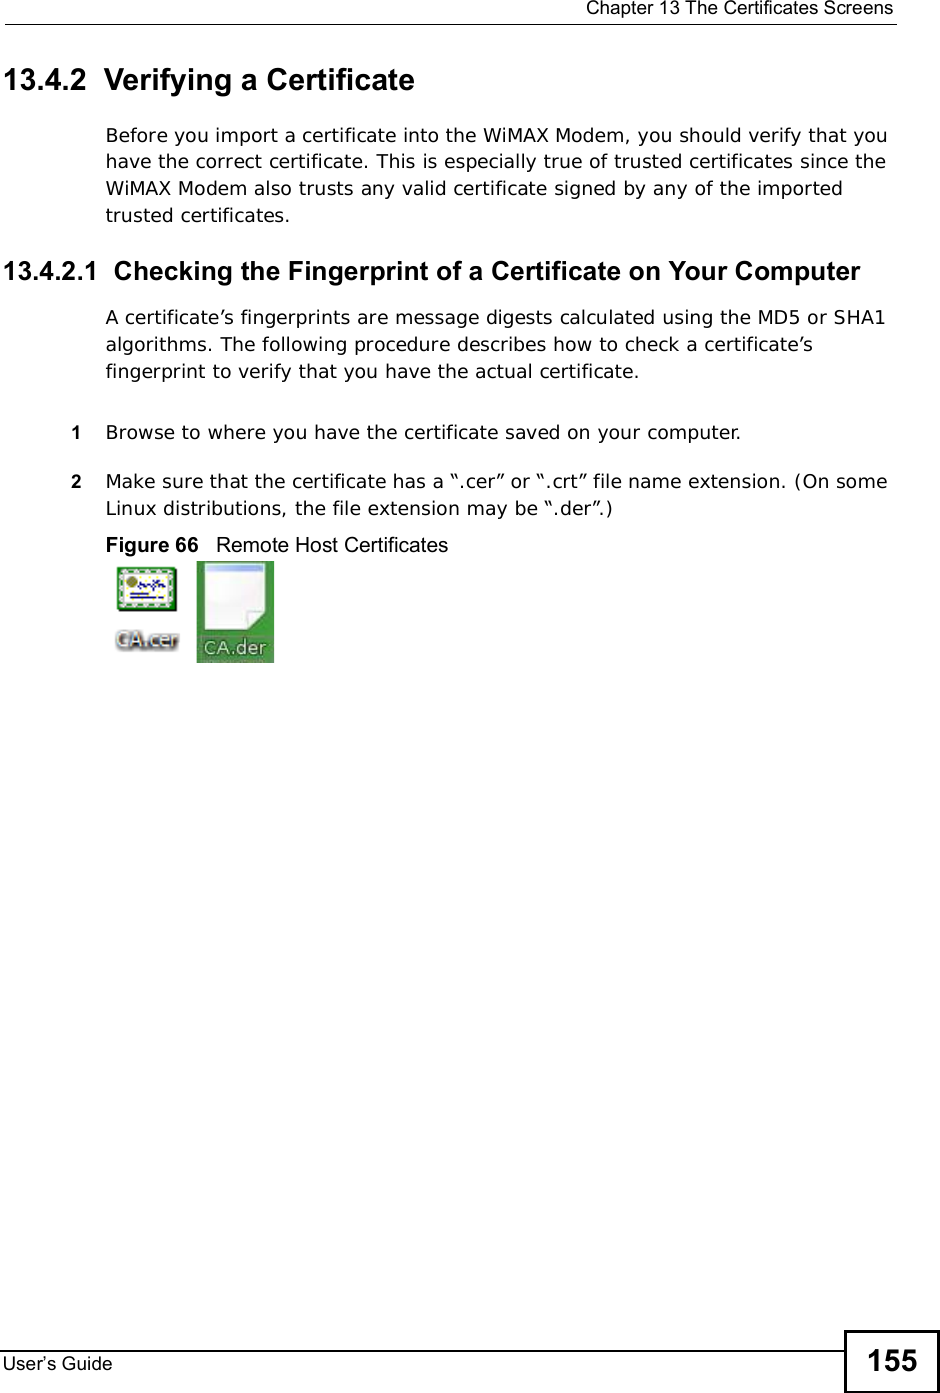  Chapter 13The Certificates ScreensUser s Guide 15513.4.2  Verifying a CertificateBefore you import a certificate into the WiMAX Modem, you should verify that you have the correct certificate. This is especially true of trusted certificates since the WiMAX Modem also trusts any valid certificate signed by any of the imported trusted certificates.13.4.2.1  Checking the Fingerprint of a Certificate on Your ComputerA certificate’s fingerprints are message digests calculated using the MD5 or SHA1 algorithms. The following procedure describes how to check a certificate’s fingerprint to verify that you have the actual certificate. 1Browse to where you have the certificate saved on your computer. 2Make sure that the certificate has a “.cer” or “.crt” file name extension. (On some Linux distributions, the file extension may be “.der”.)Figure 66   Remote Host Certificates